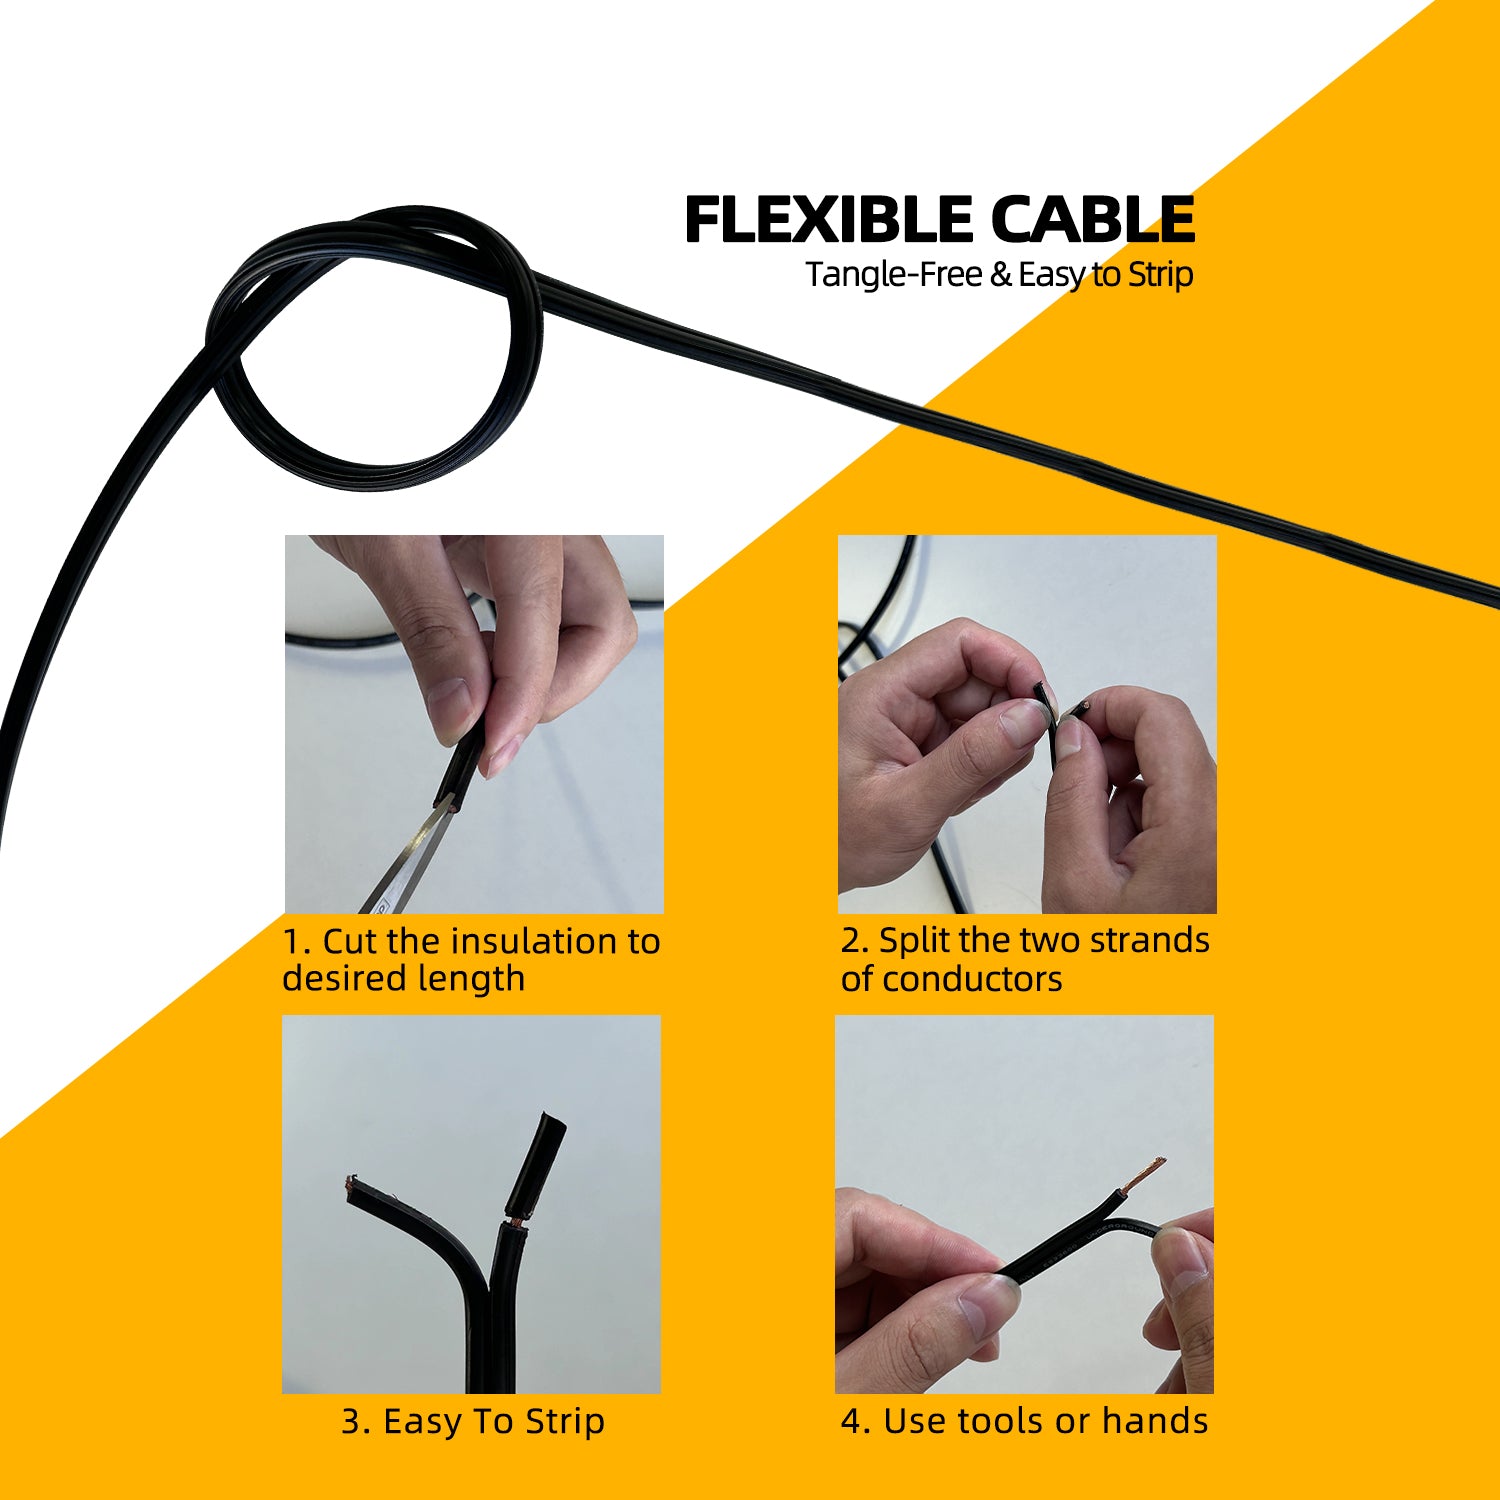 Flexible 14-gauge low-voltage landscape wire with instructions on how to prepare the cable: Cut the insulation to desired length, split the two strands of conductors, easy to strip, use tools or hands. Tangle-Free & Easy to Strip.